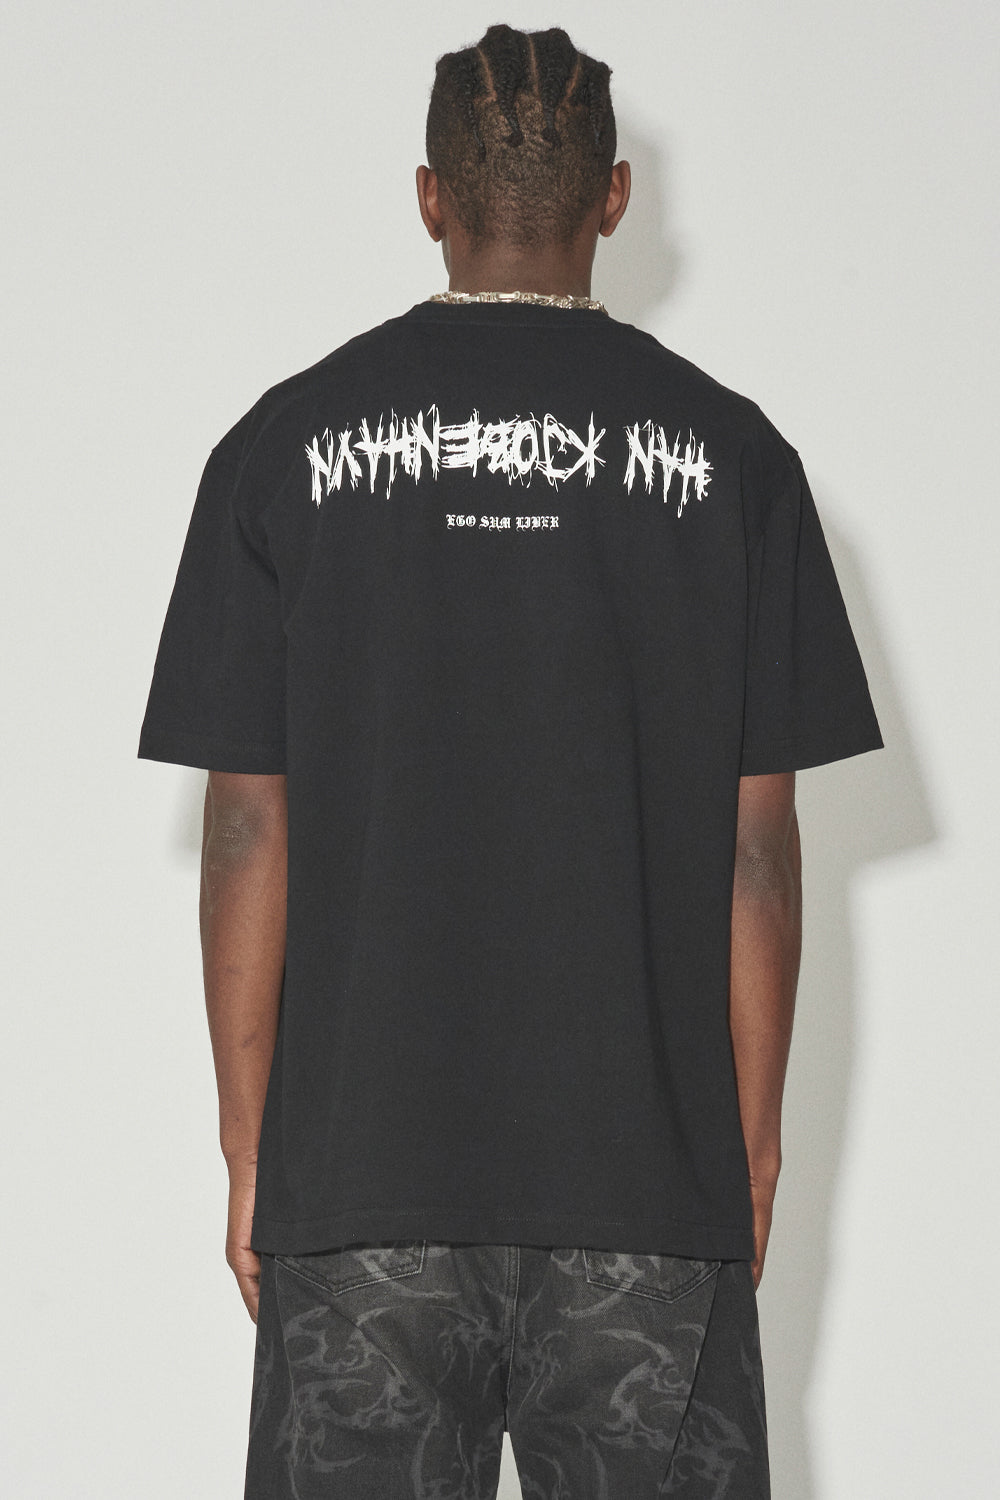 Buy the Han Kjobenhavn Upside Down Boxy T-Shirt in Black at Intro. Spend £50 for free UK delivery. Official stockists. We ship worldwide.